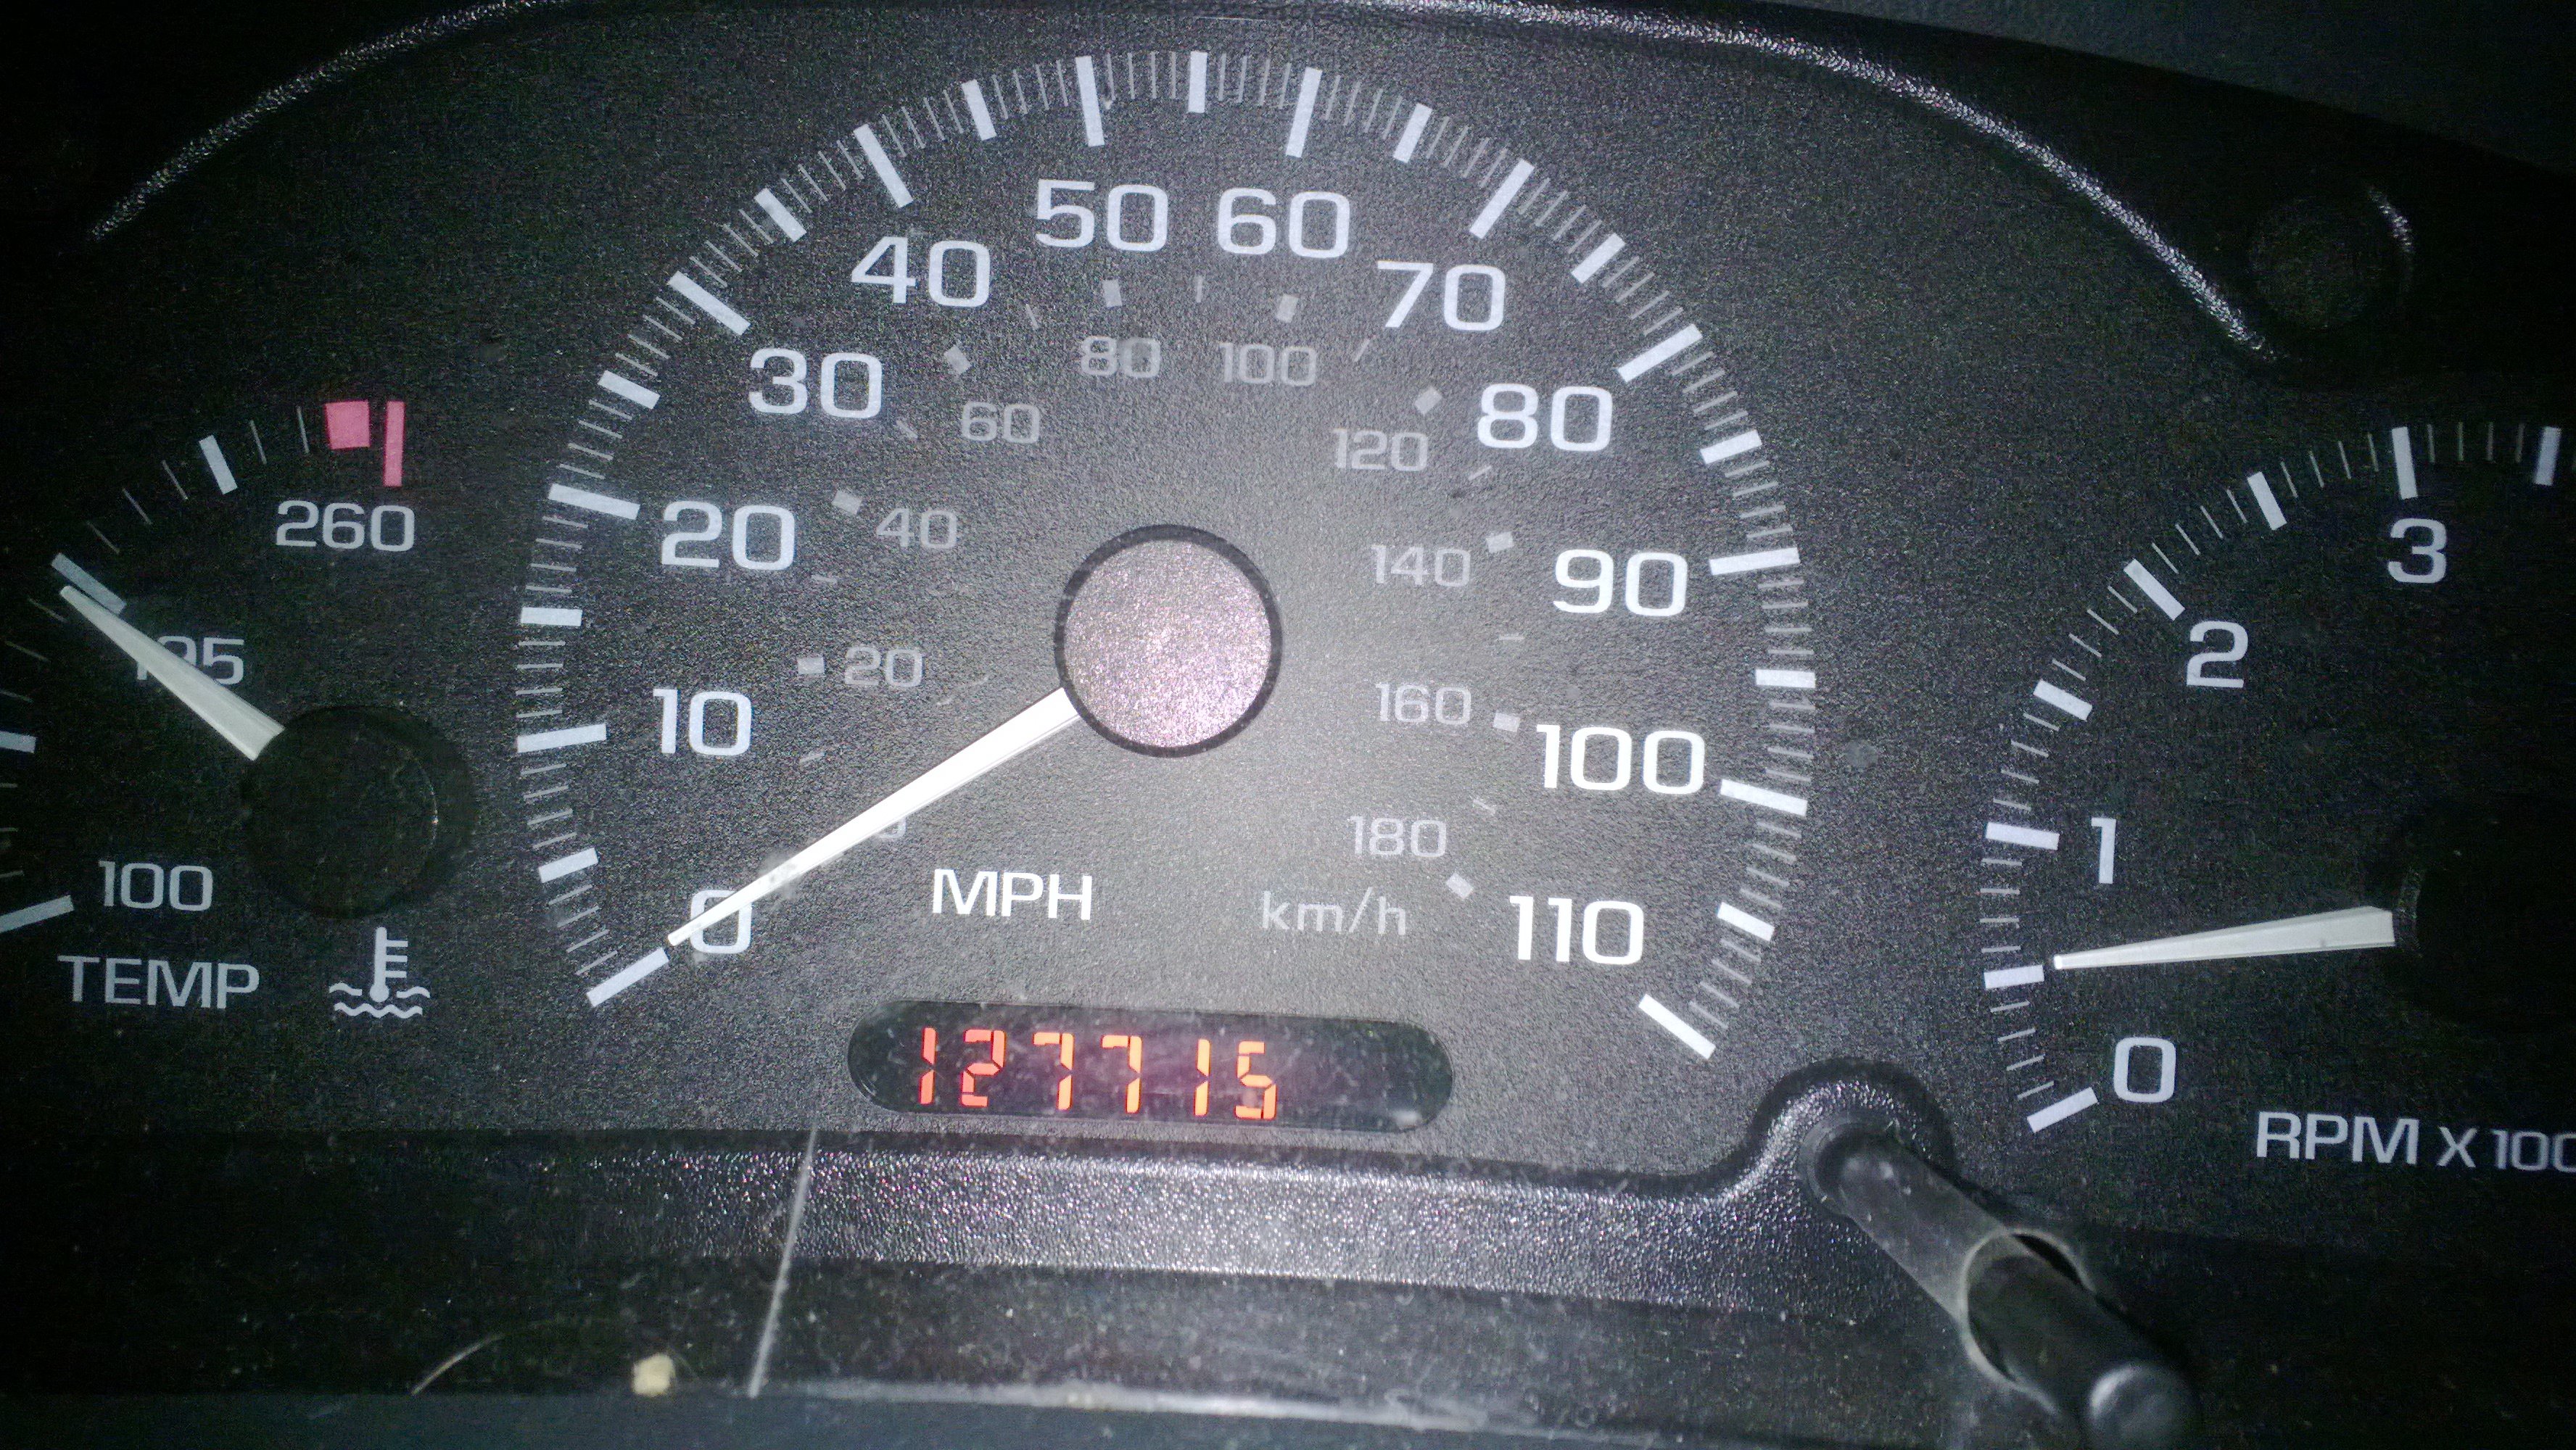 A palindromic number or numeral palindrome is shown on my odometer